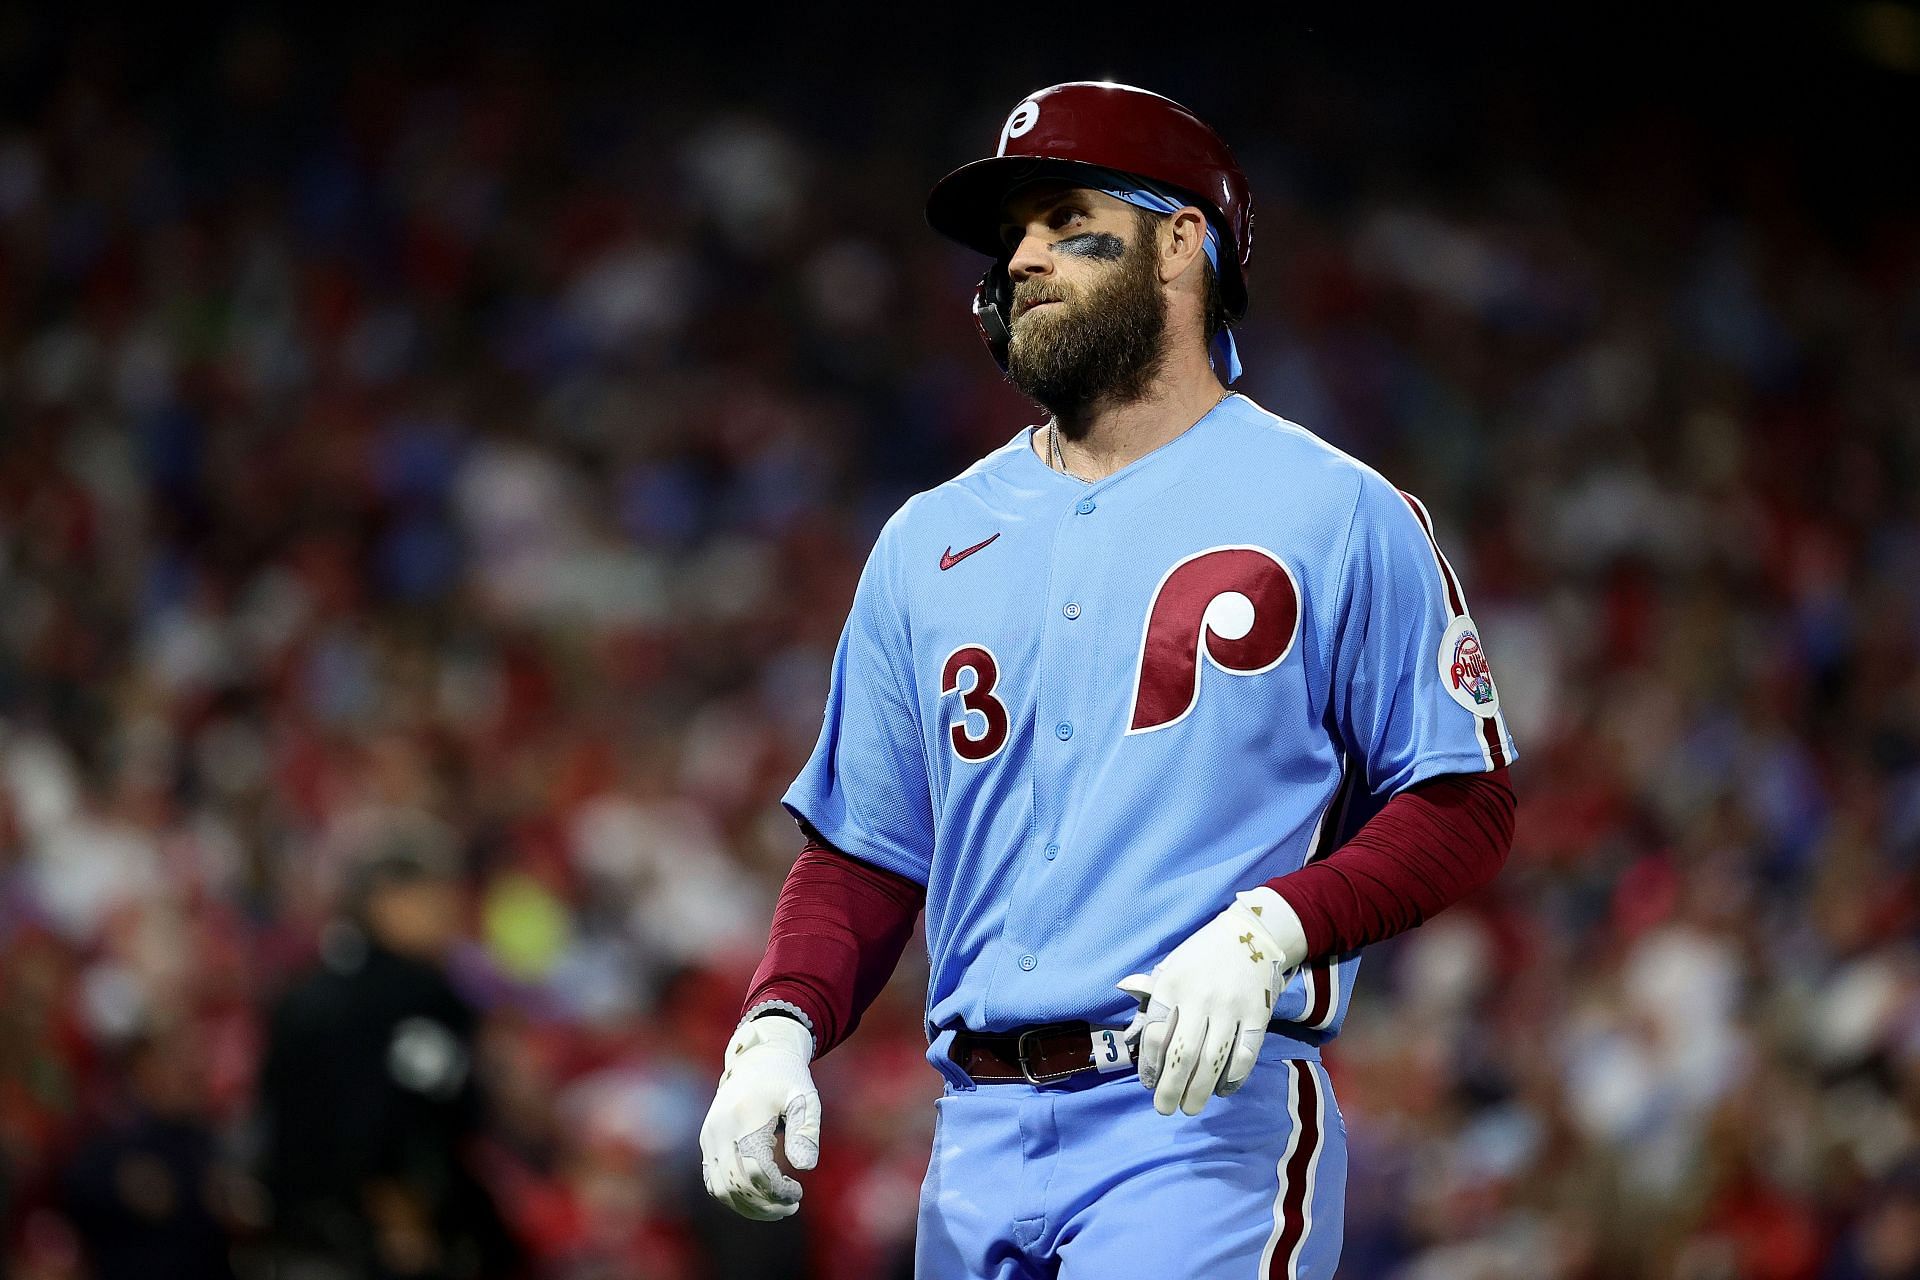 Bryce Harper 'ahead' of schedule in recovery from Tommy John